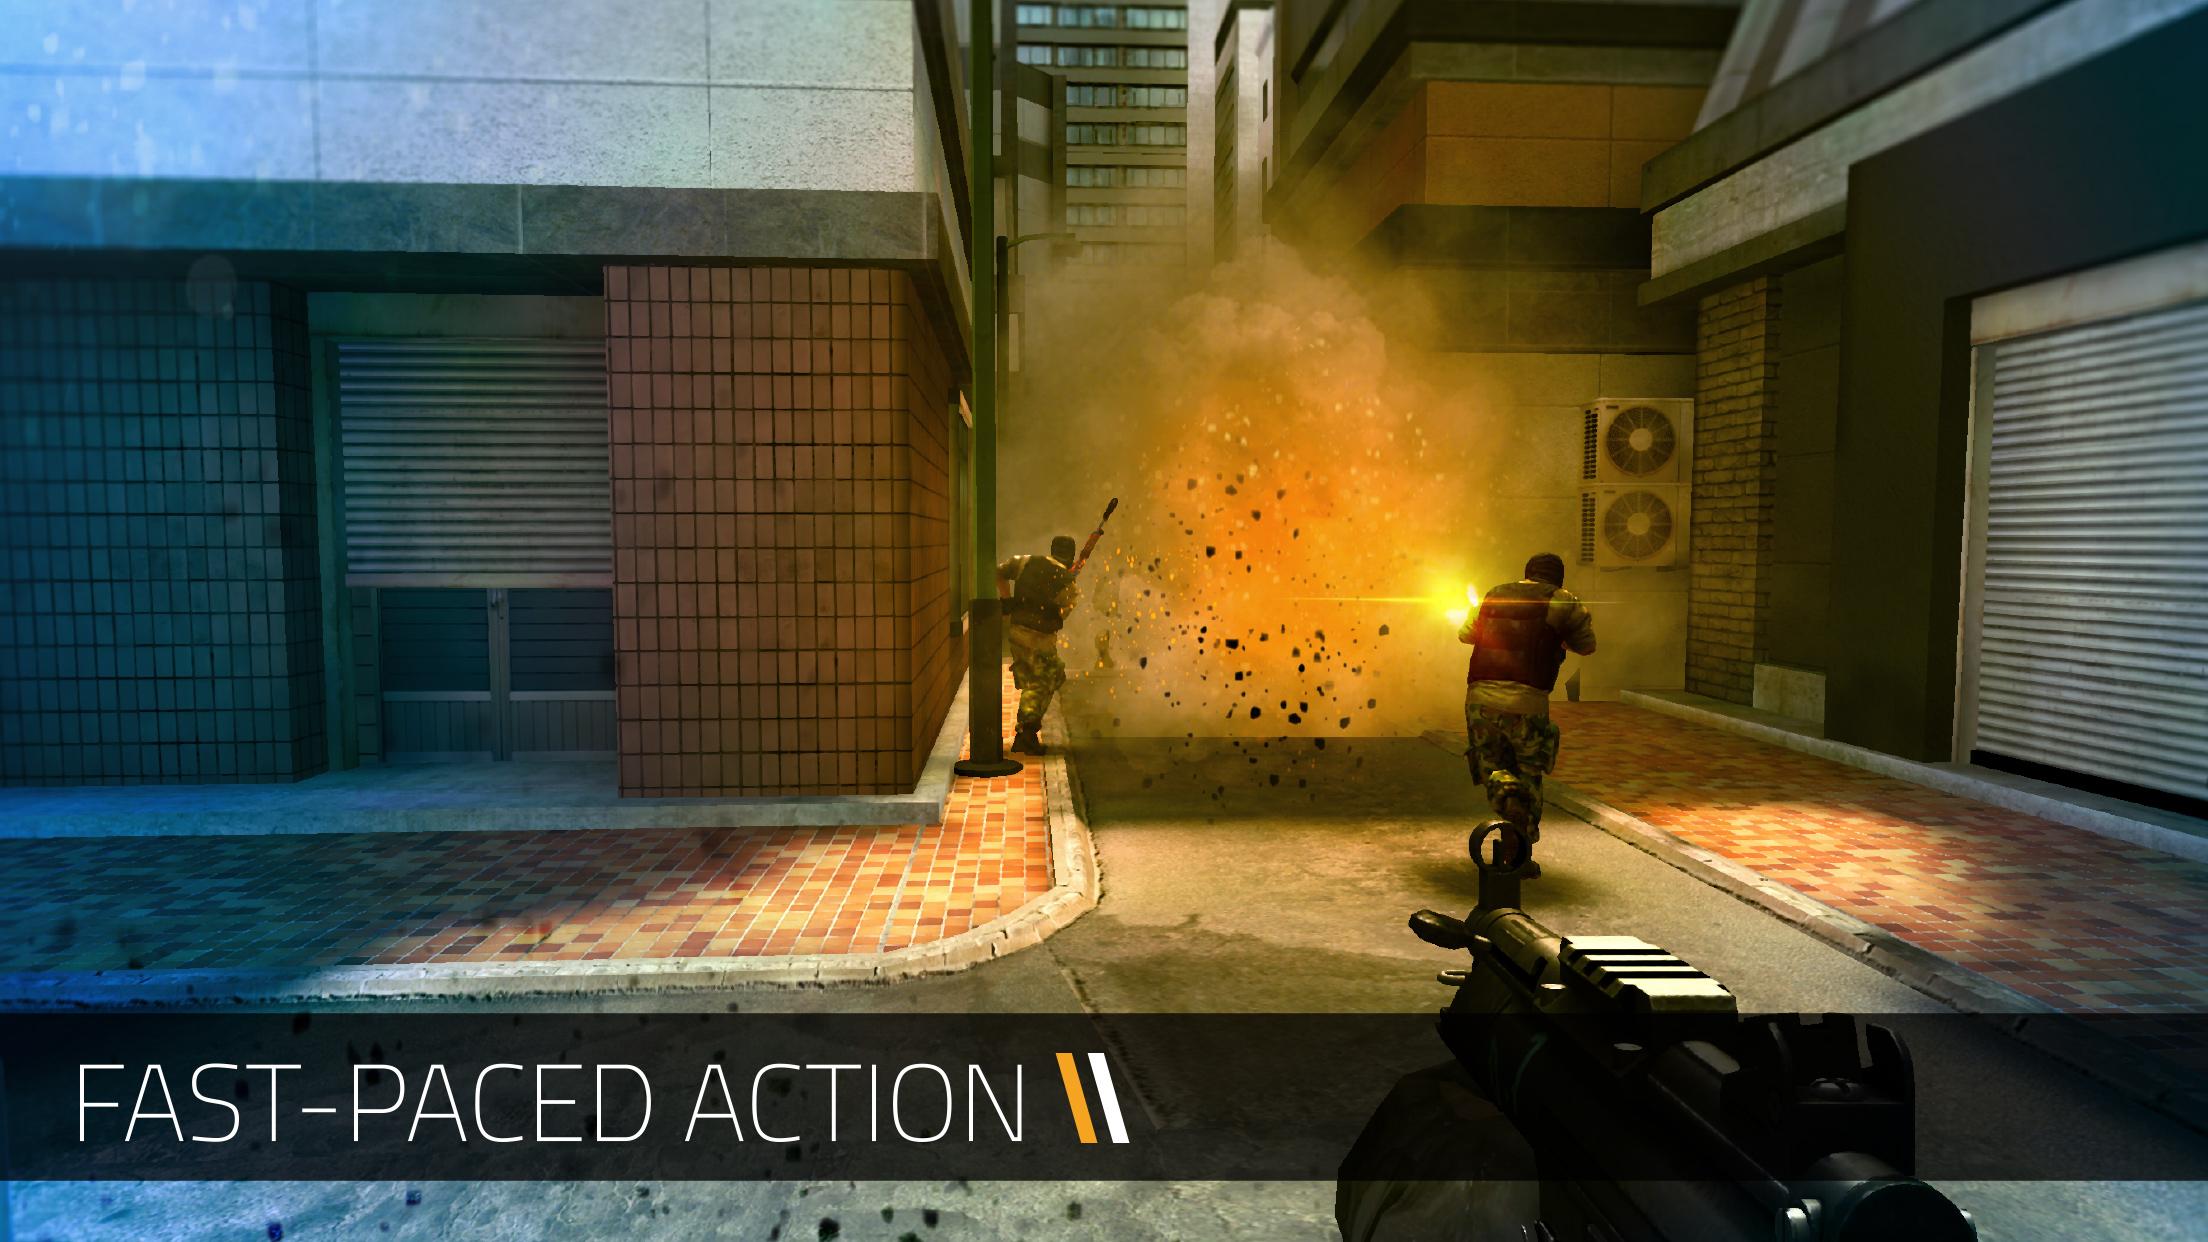 Forward Assault for Android - APK Download - 